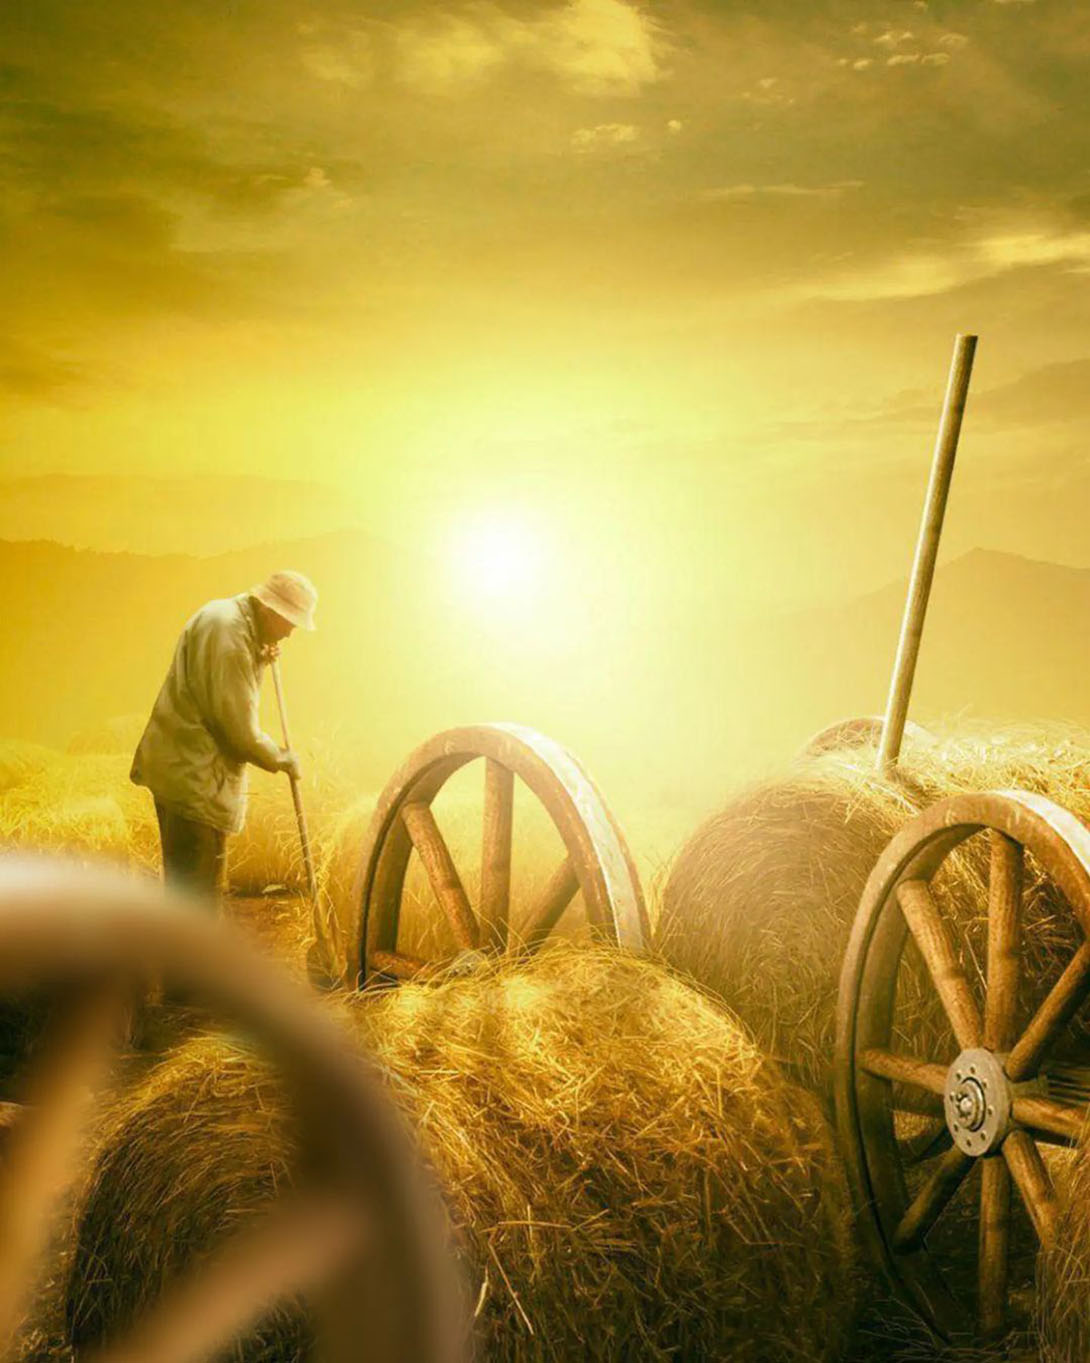 Kisan Diwas 2019 Wishes: WhatsApp Messages, Images, Quotes, SMS, Greetings  to Celebrate National Farmers' Day | 🙏🏻 LatestLY